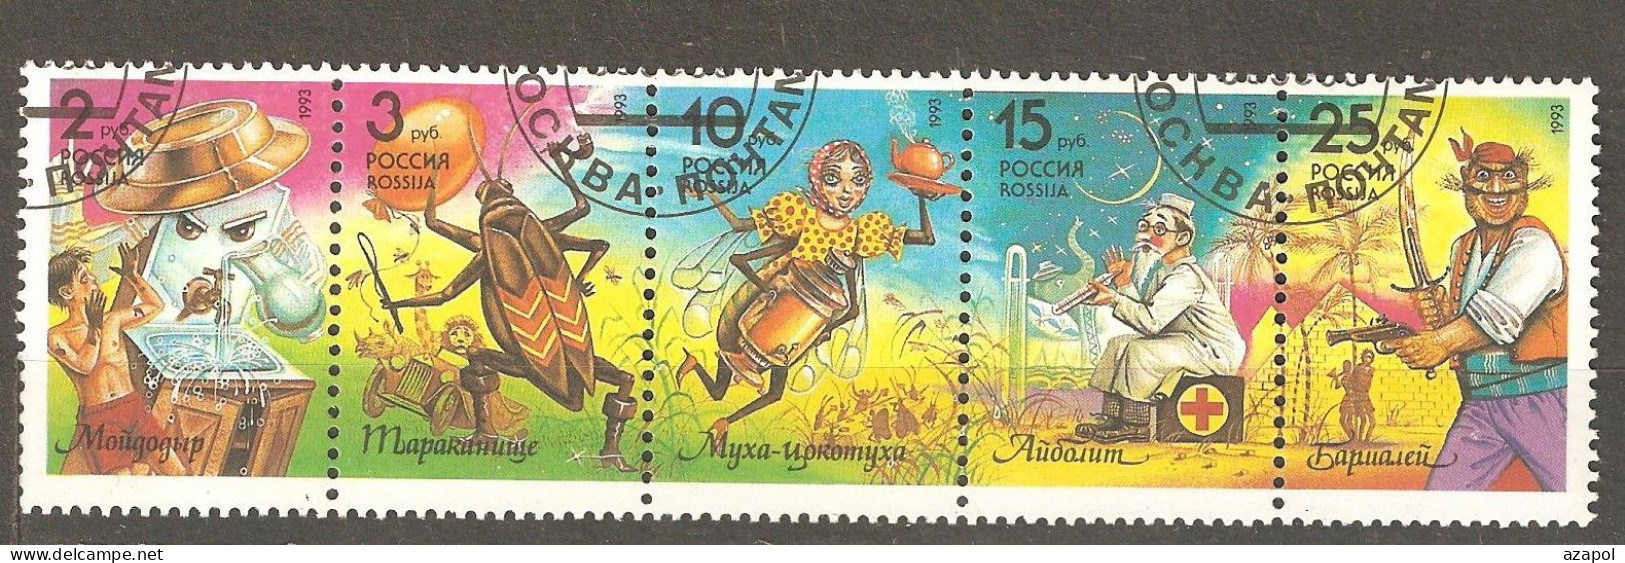 Russia: Full Set Of 4 Used CTO Stamps In Strip, Characters From Children's Books, 1993, Mi#289-93 - Used Stamps